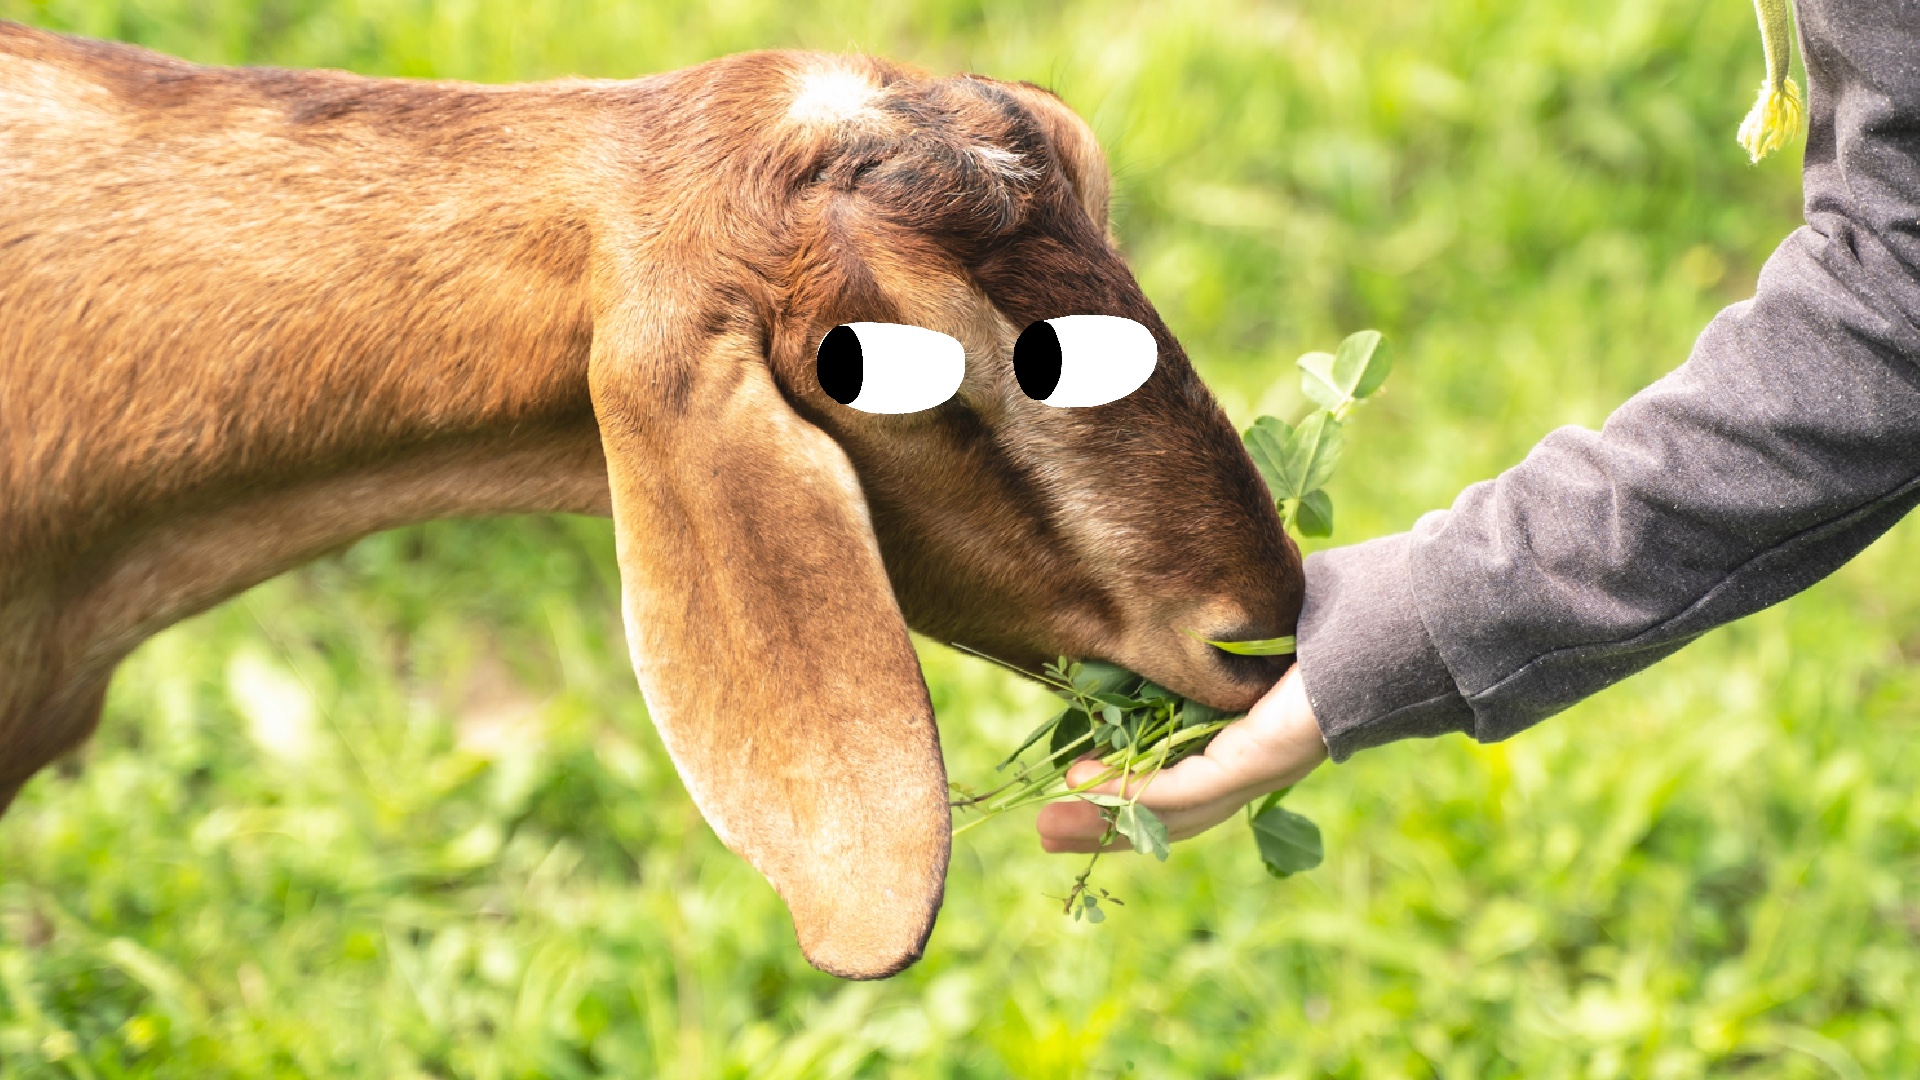 15 Amazing Things You Probably Didn't Know About Goats